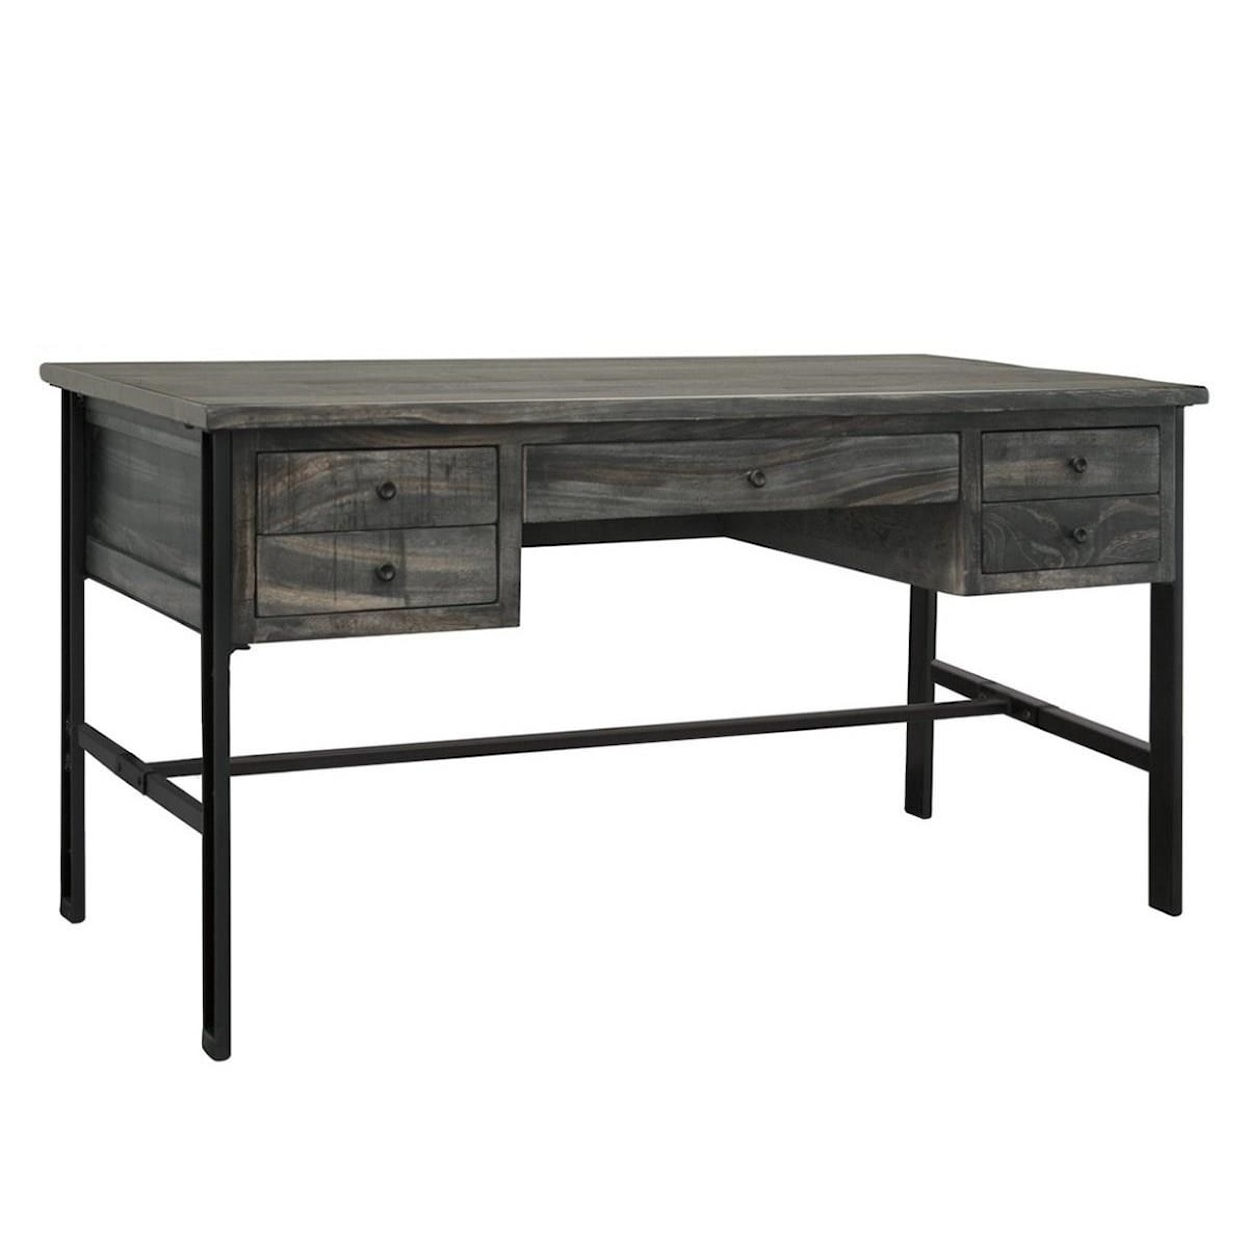 IFD International Furniture Direct Moro Desk with 5 Drawers